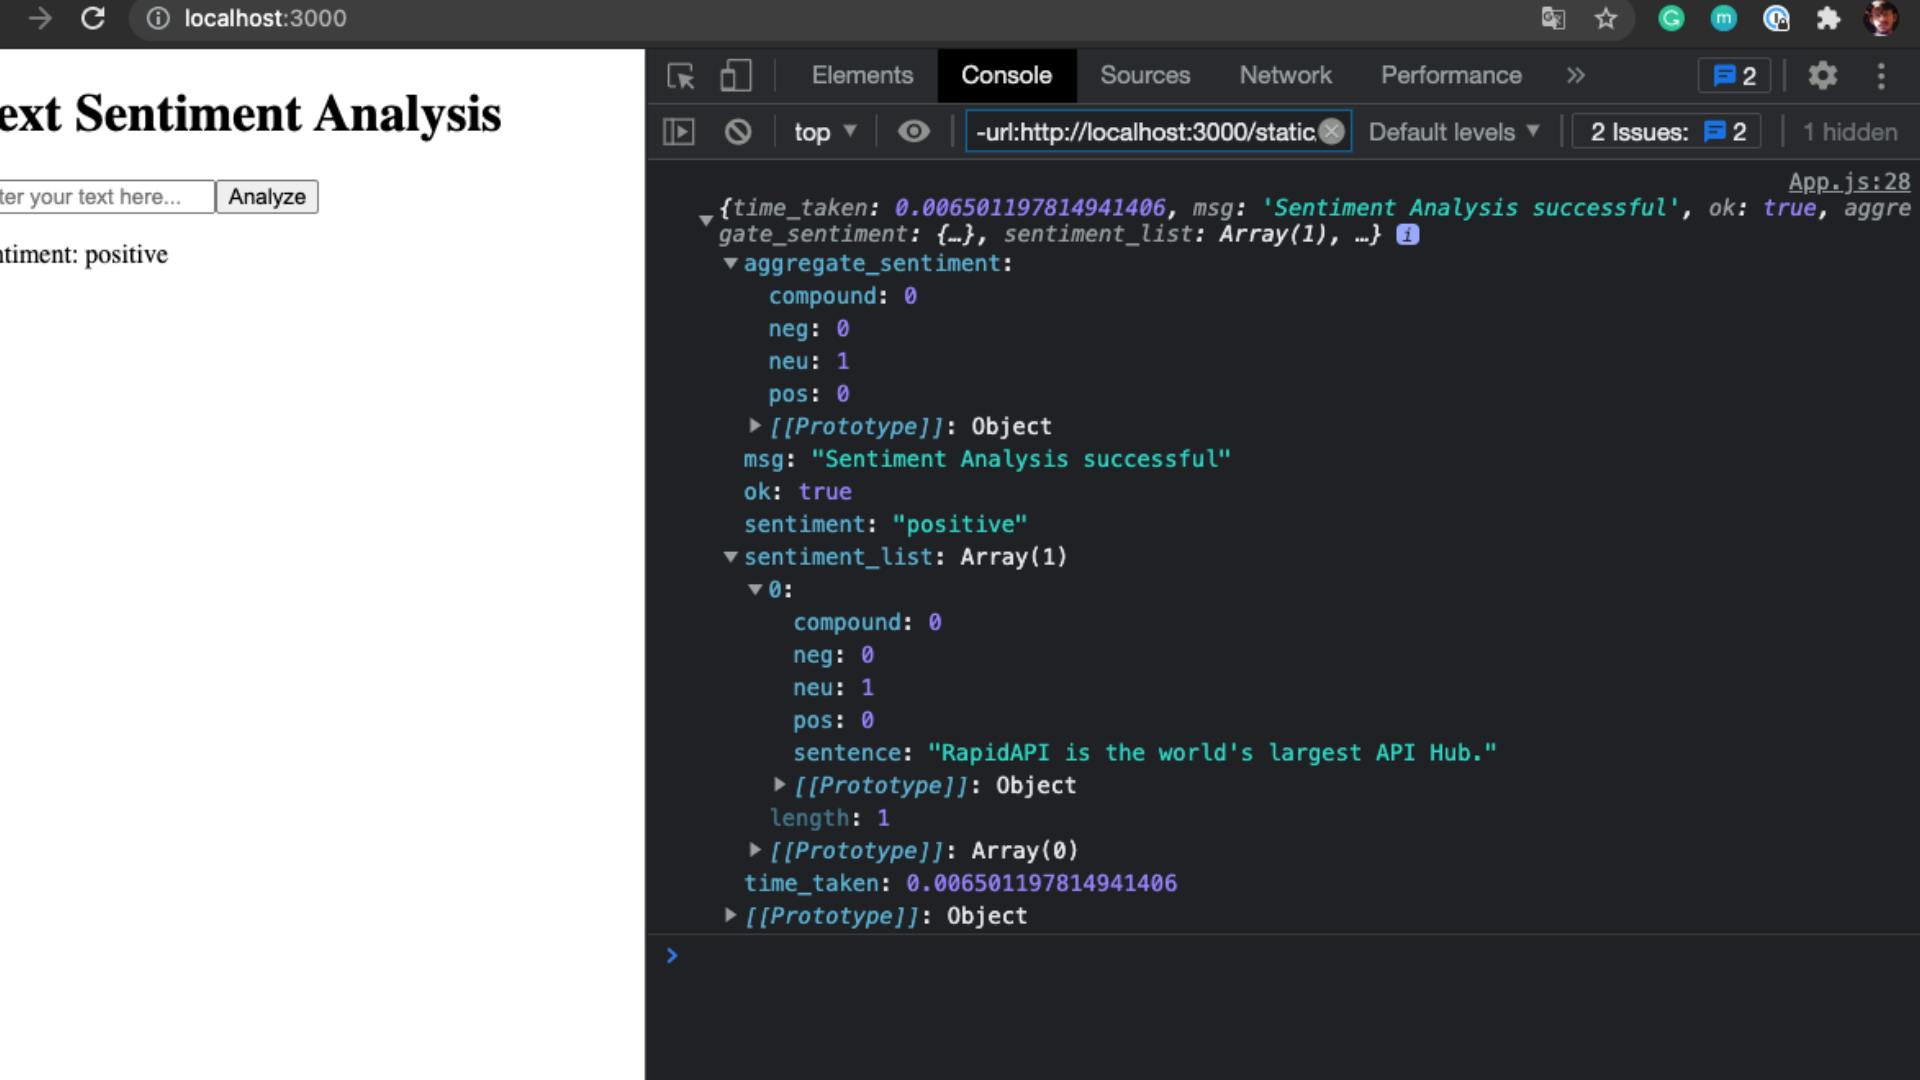 text sentiment analysis app with API reponse in the console